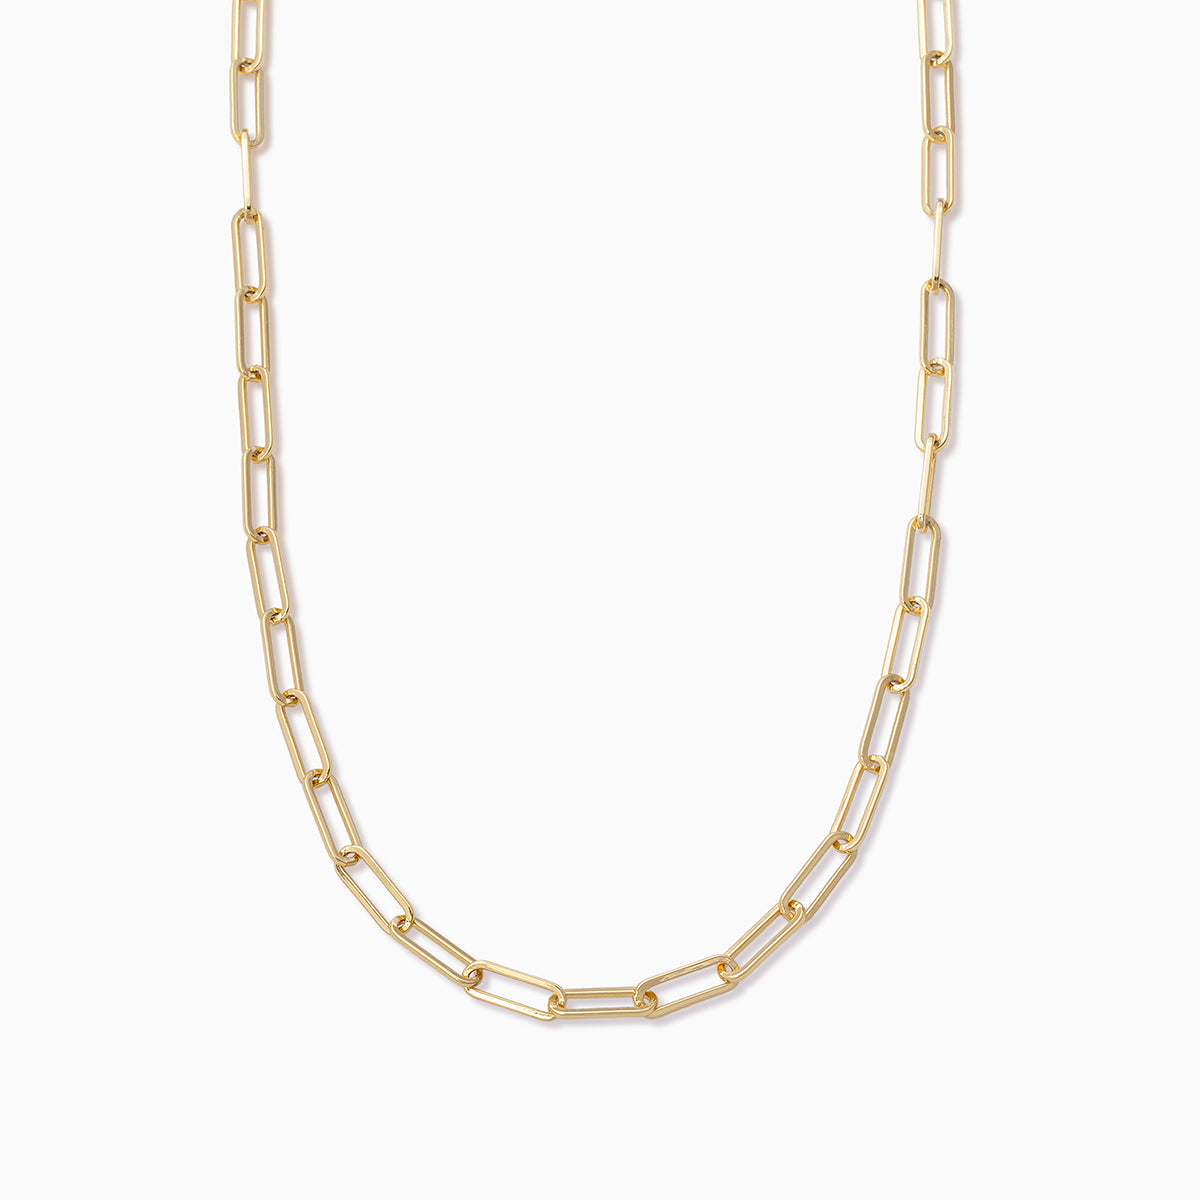 Thin Linked Up Necklace | Gold Shorter | Product Image | Uncommon James